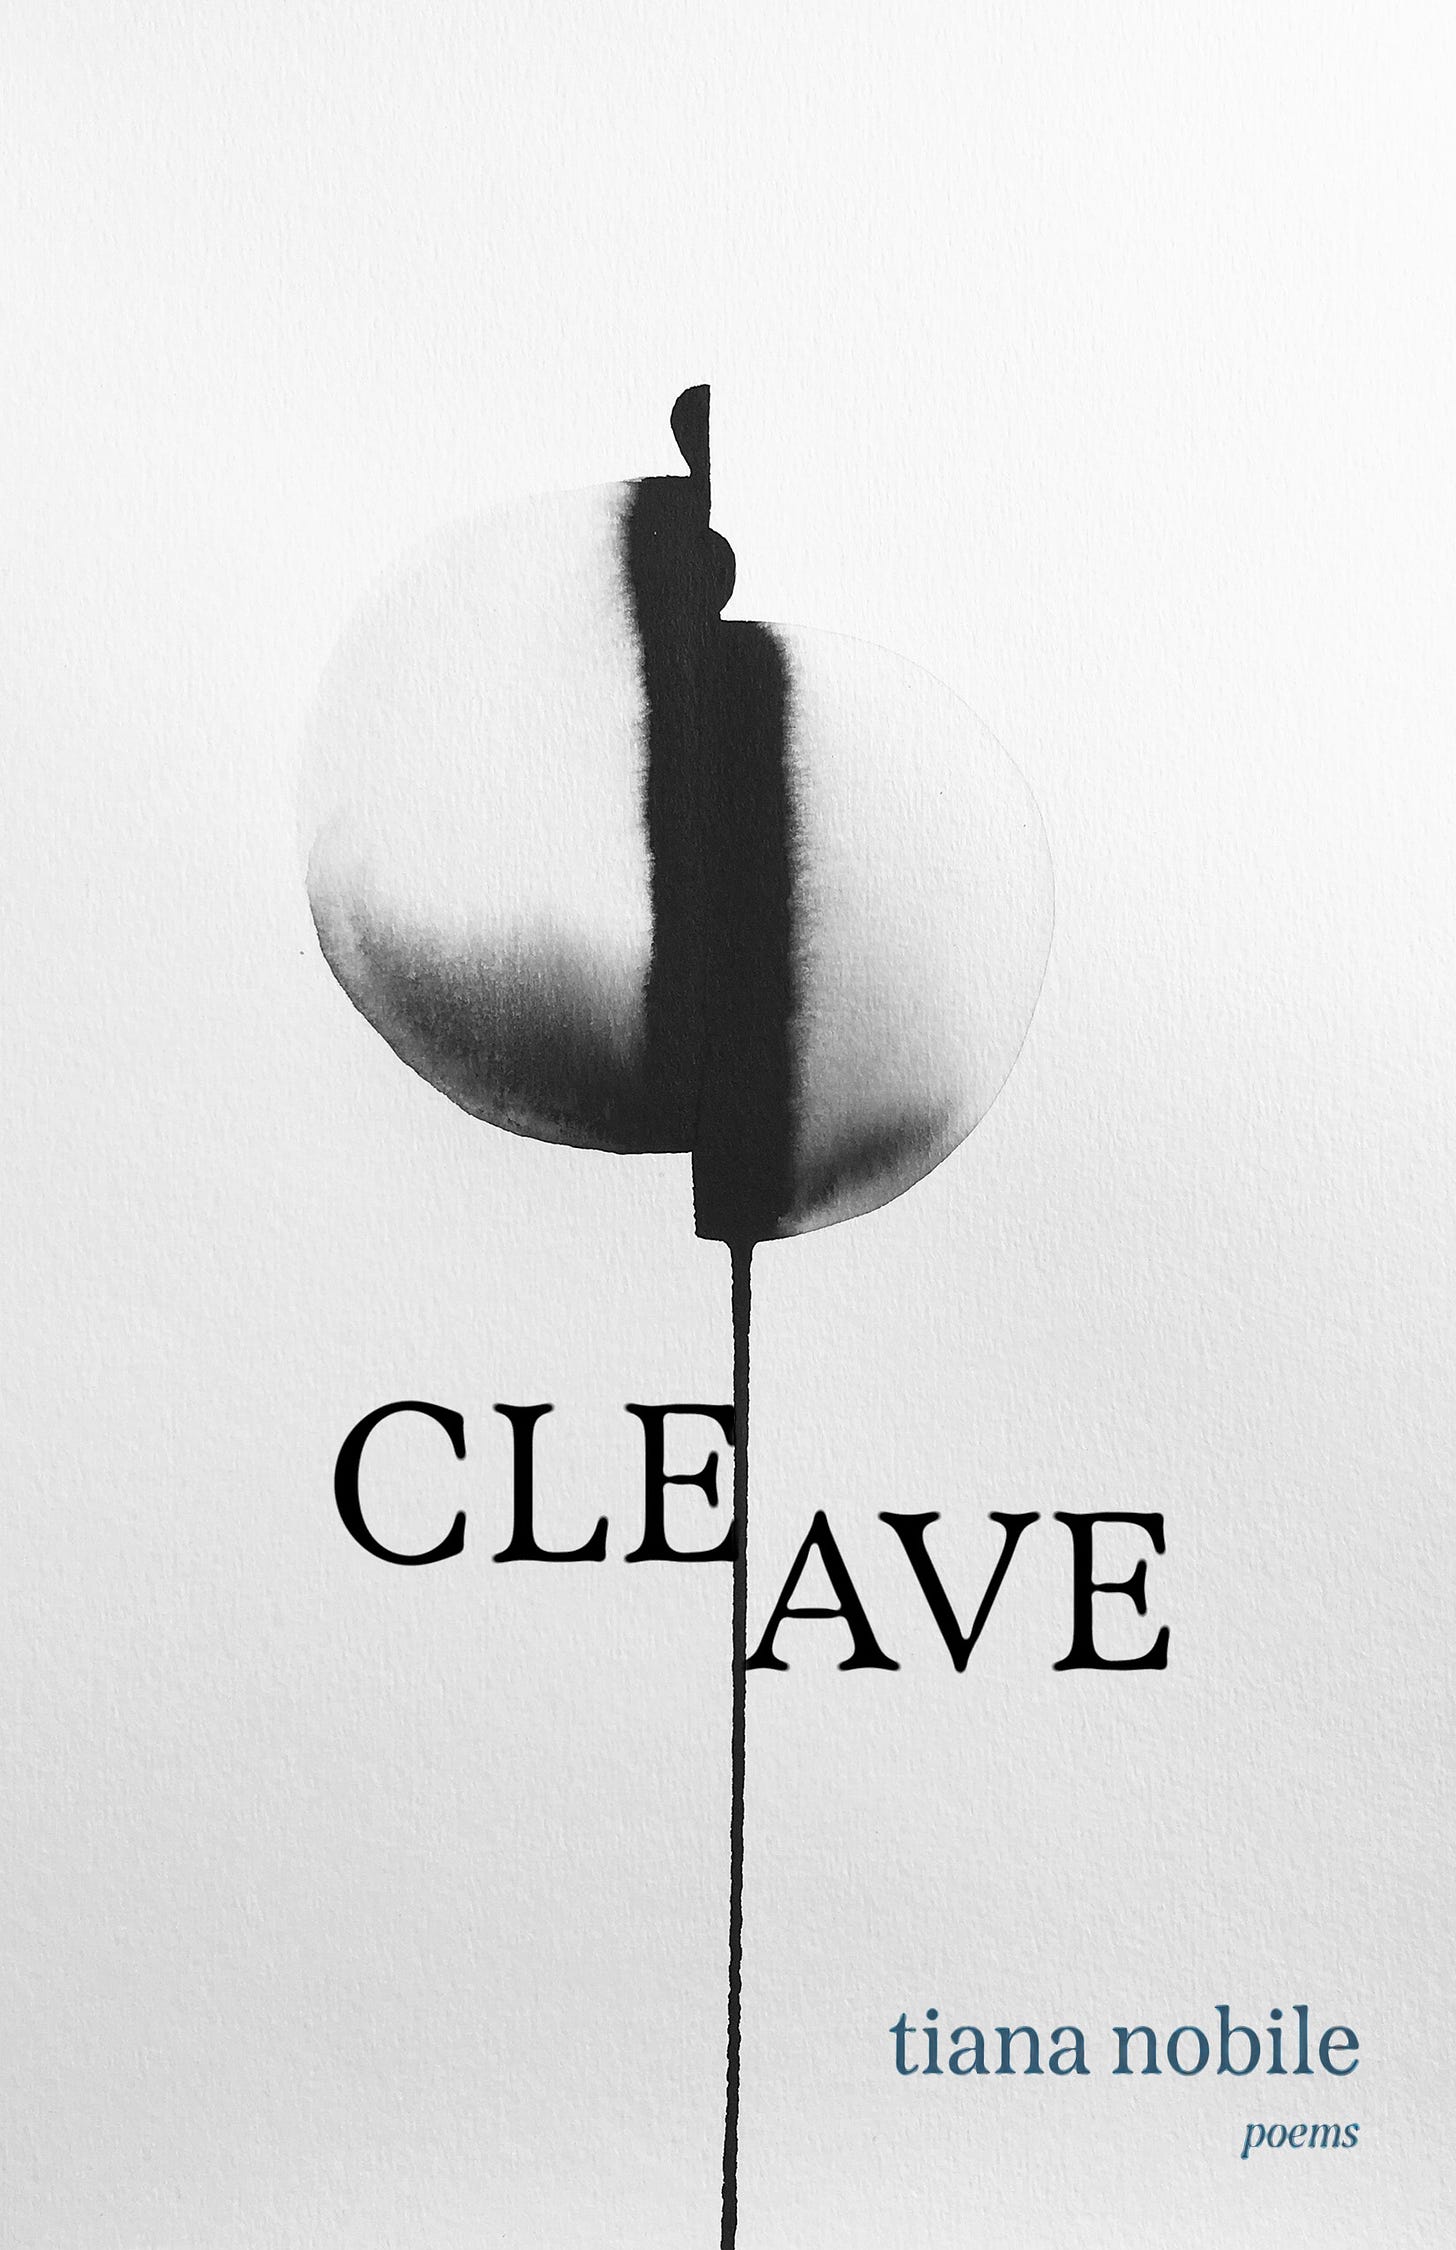 A book cover in black and white, featuring an abstract image of a circle cut in half and slightly misalinged. The line goes through the title of the book, "Cleave," splitting it between the "e" and the "a." Other text: tiana nobile, poems.